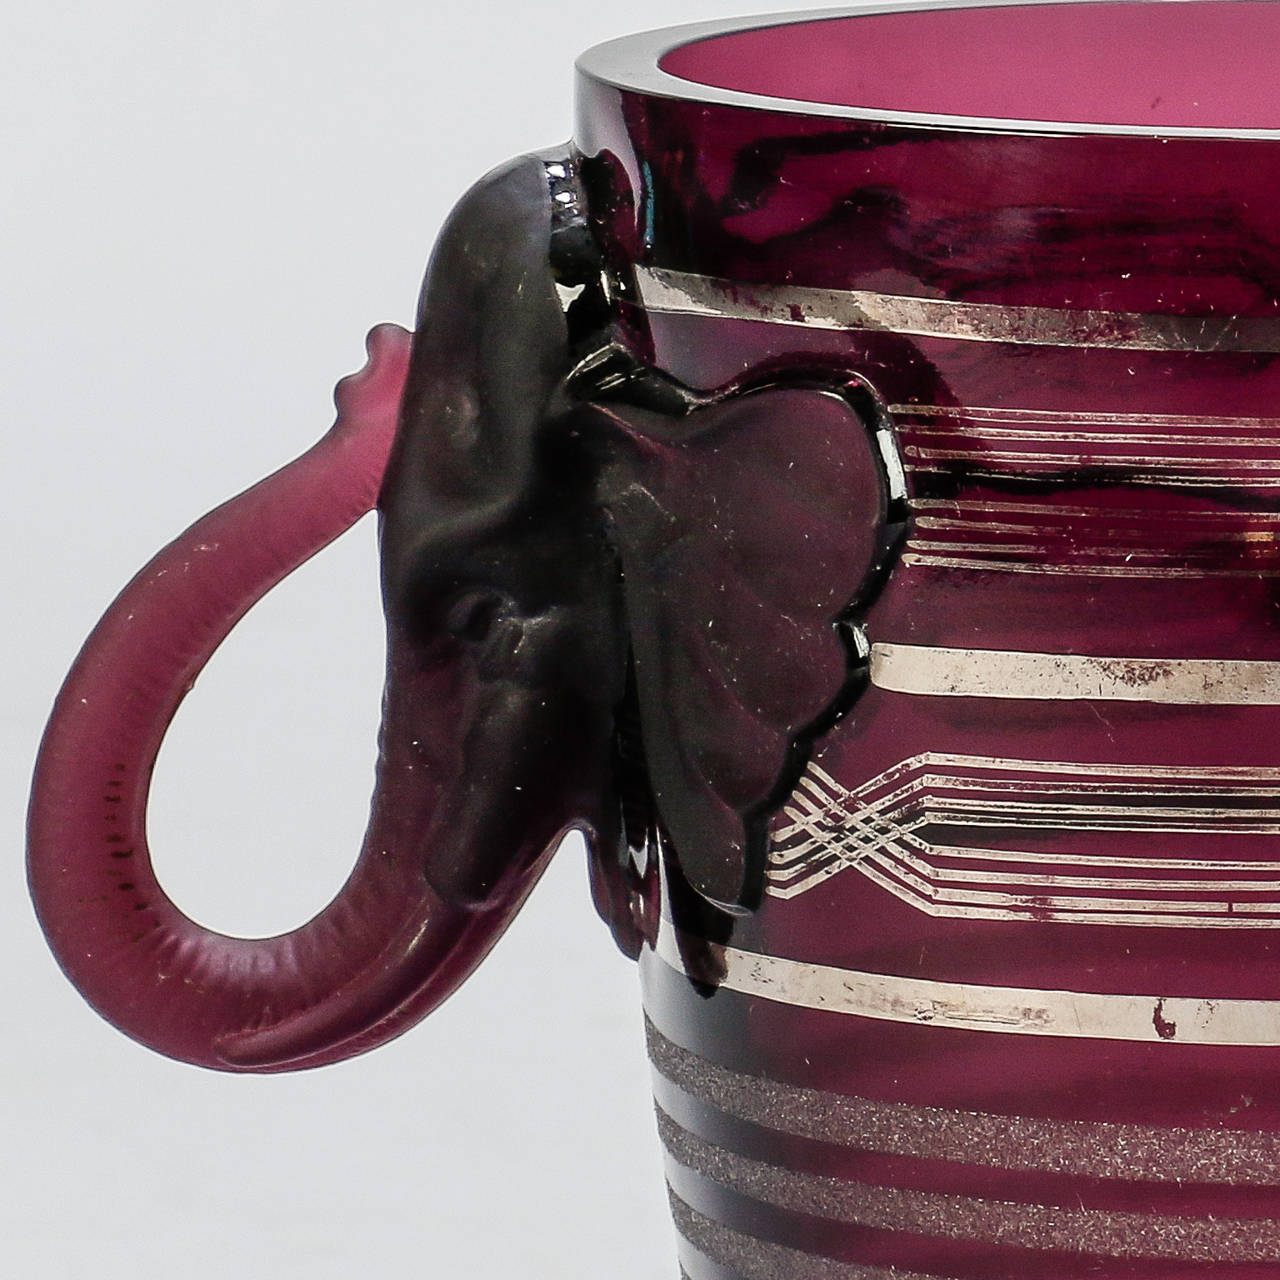 7240 Amethyst Art Glass Deco Era Vase With Elephant Handles

Dating from 1930s, this art glass vase is a rich amethyst color in a classic amphora shape with elephant heads and trunks forming the handles. Stunning.